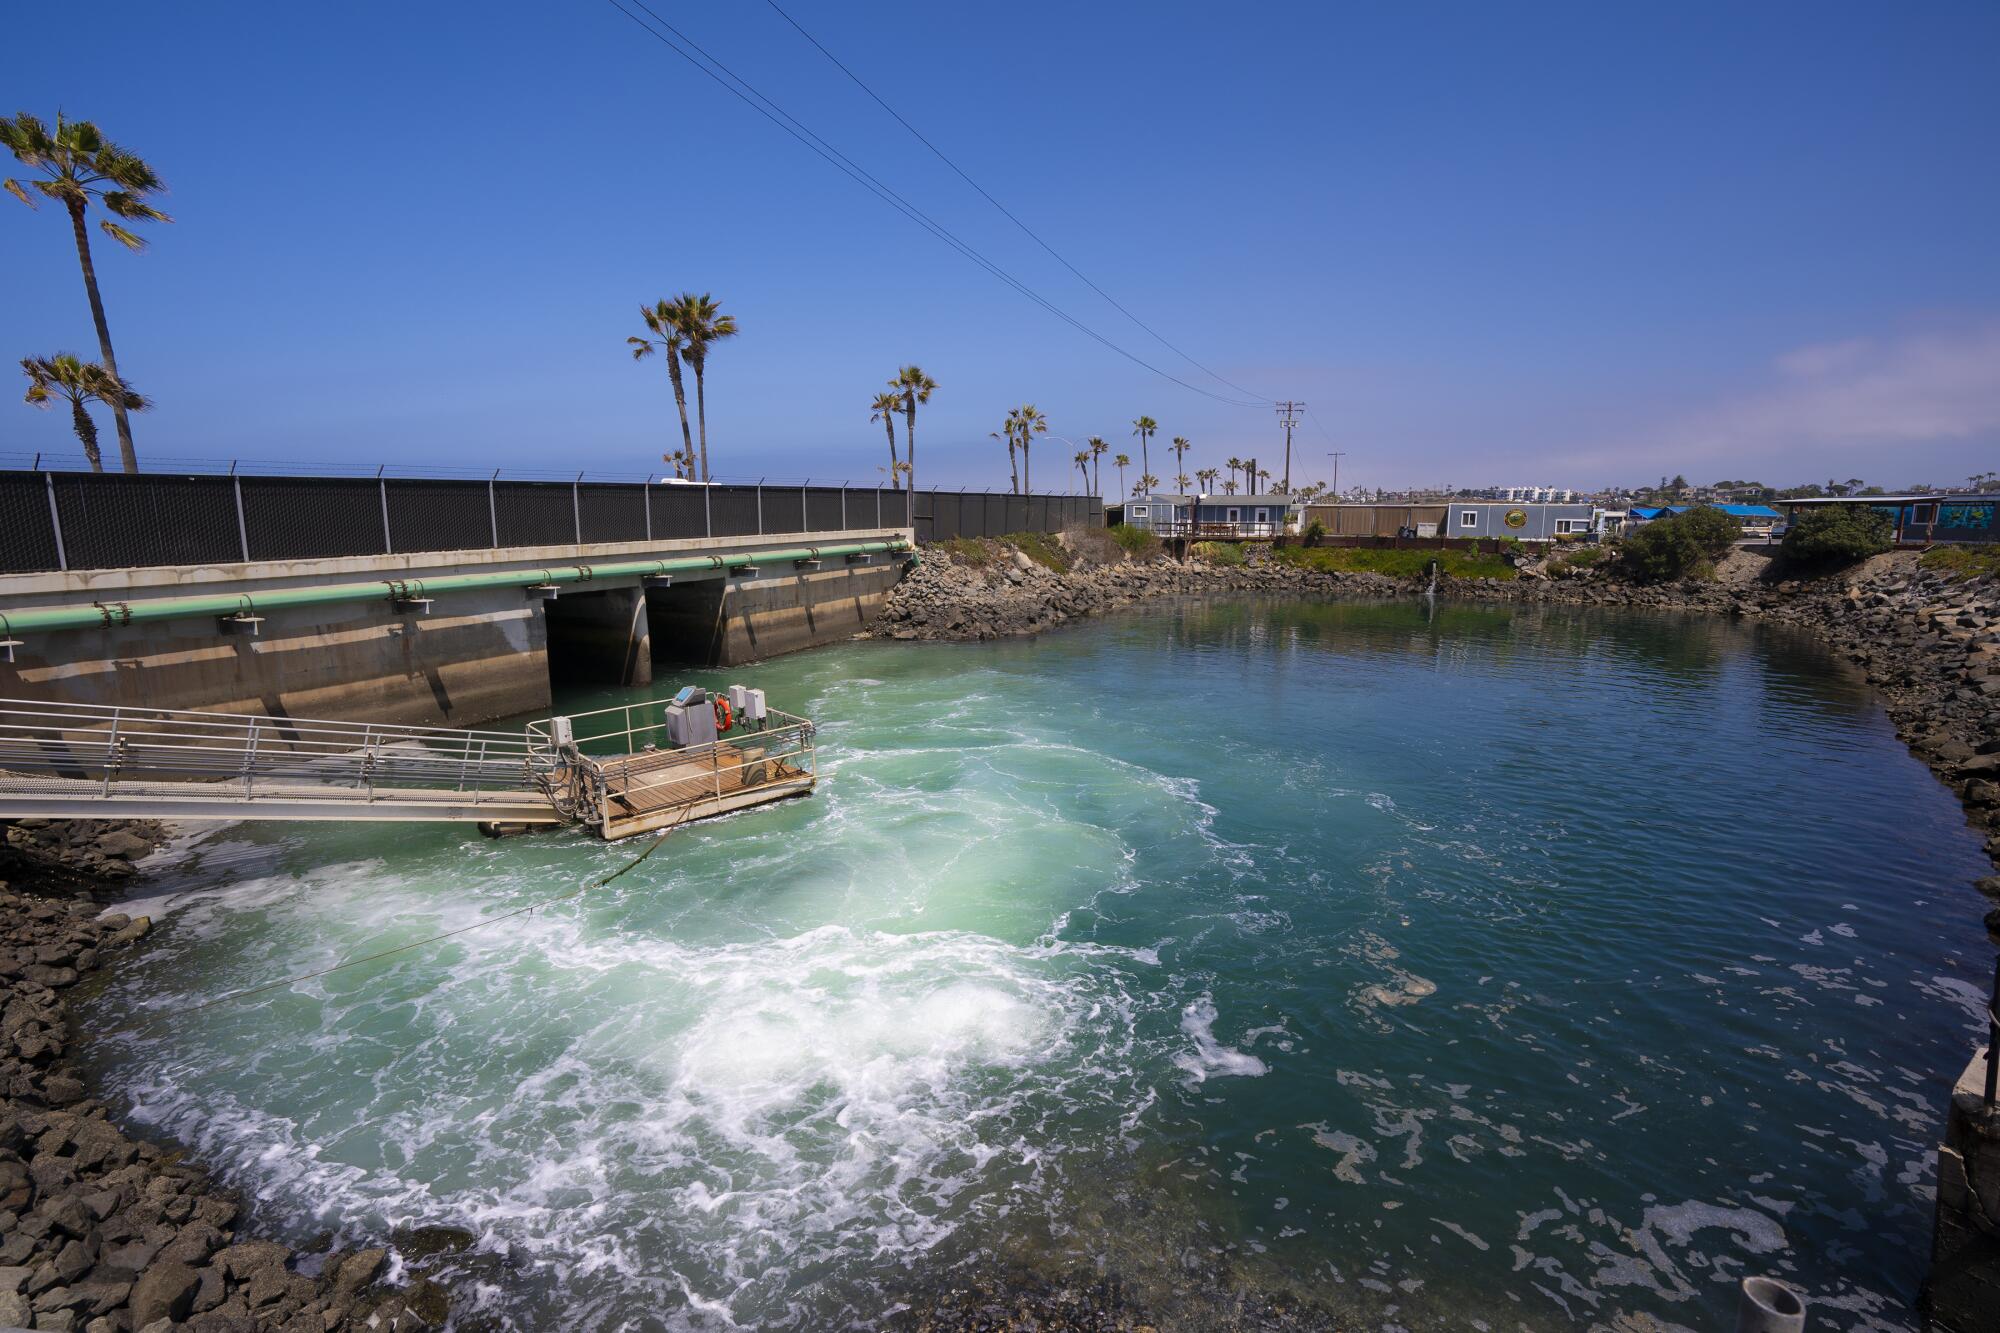 Brine water exiting from Carlsbad Desalination Plant before finally exiting out towards the ocean jetty.